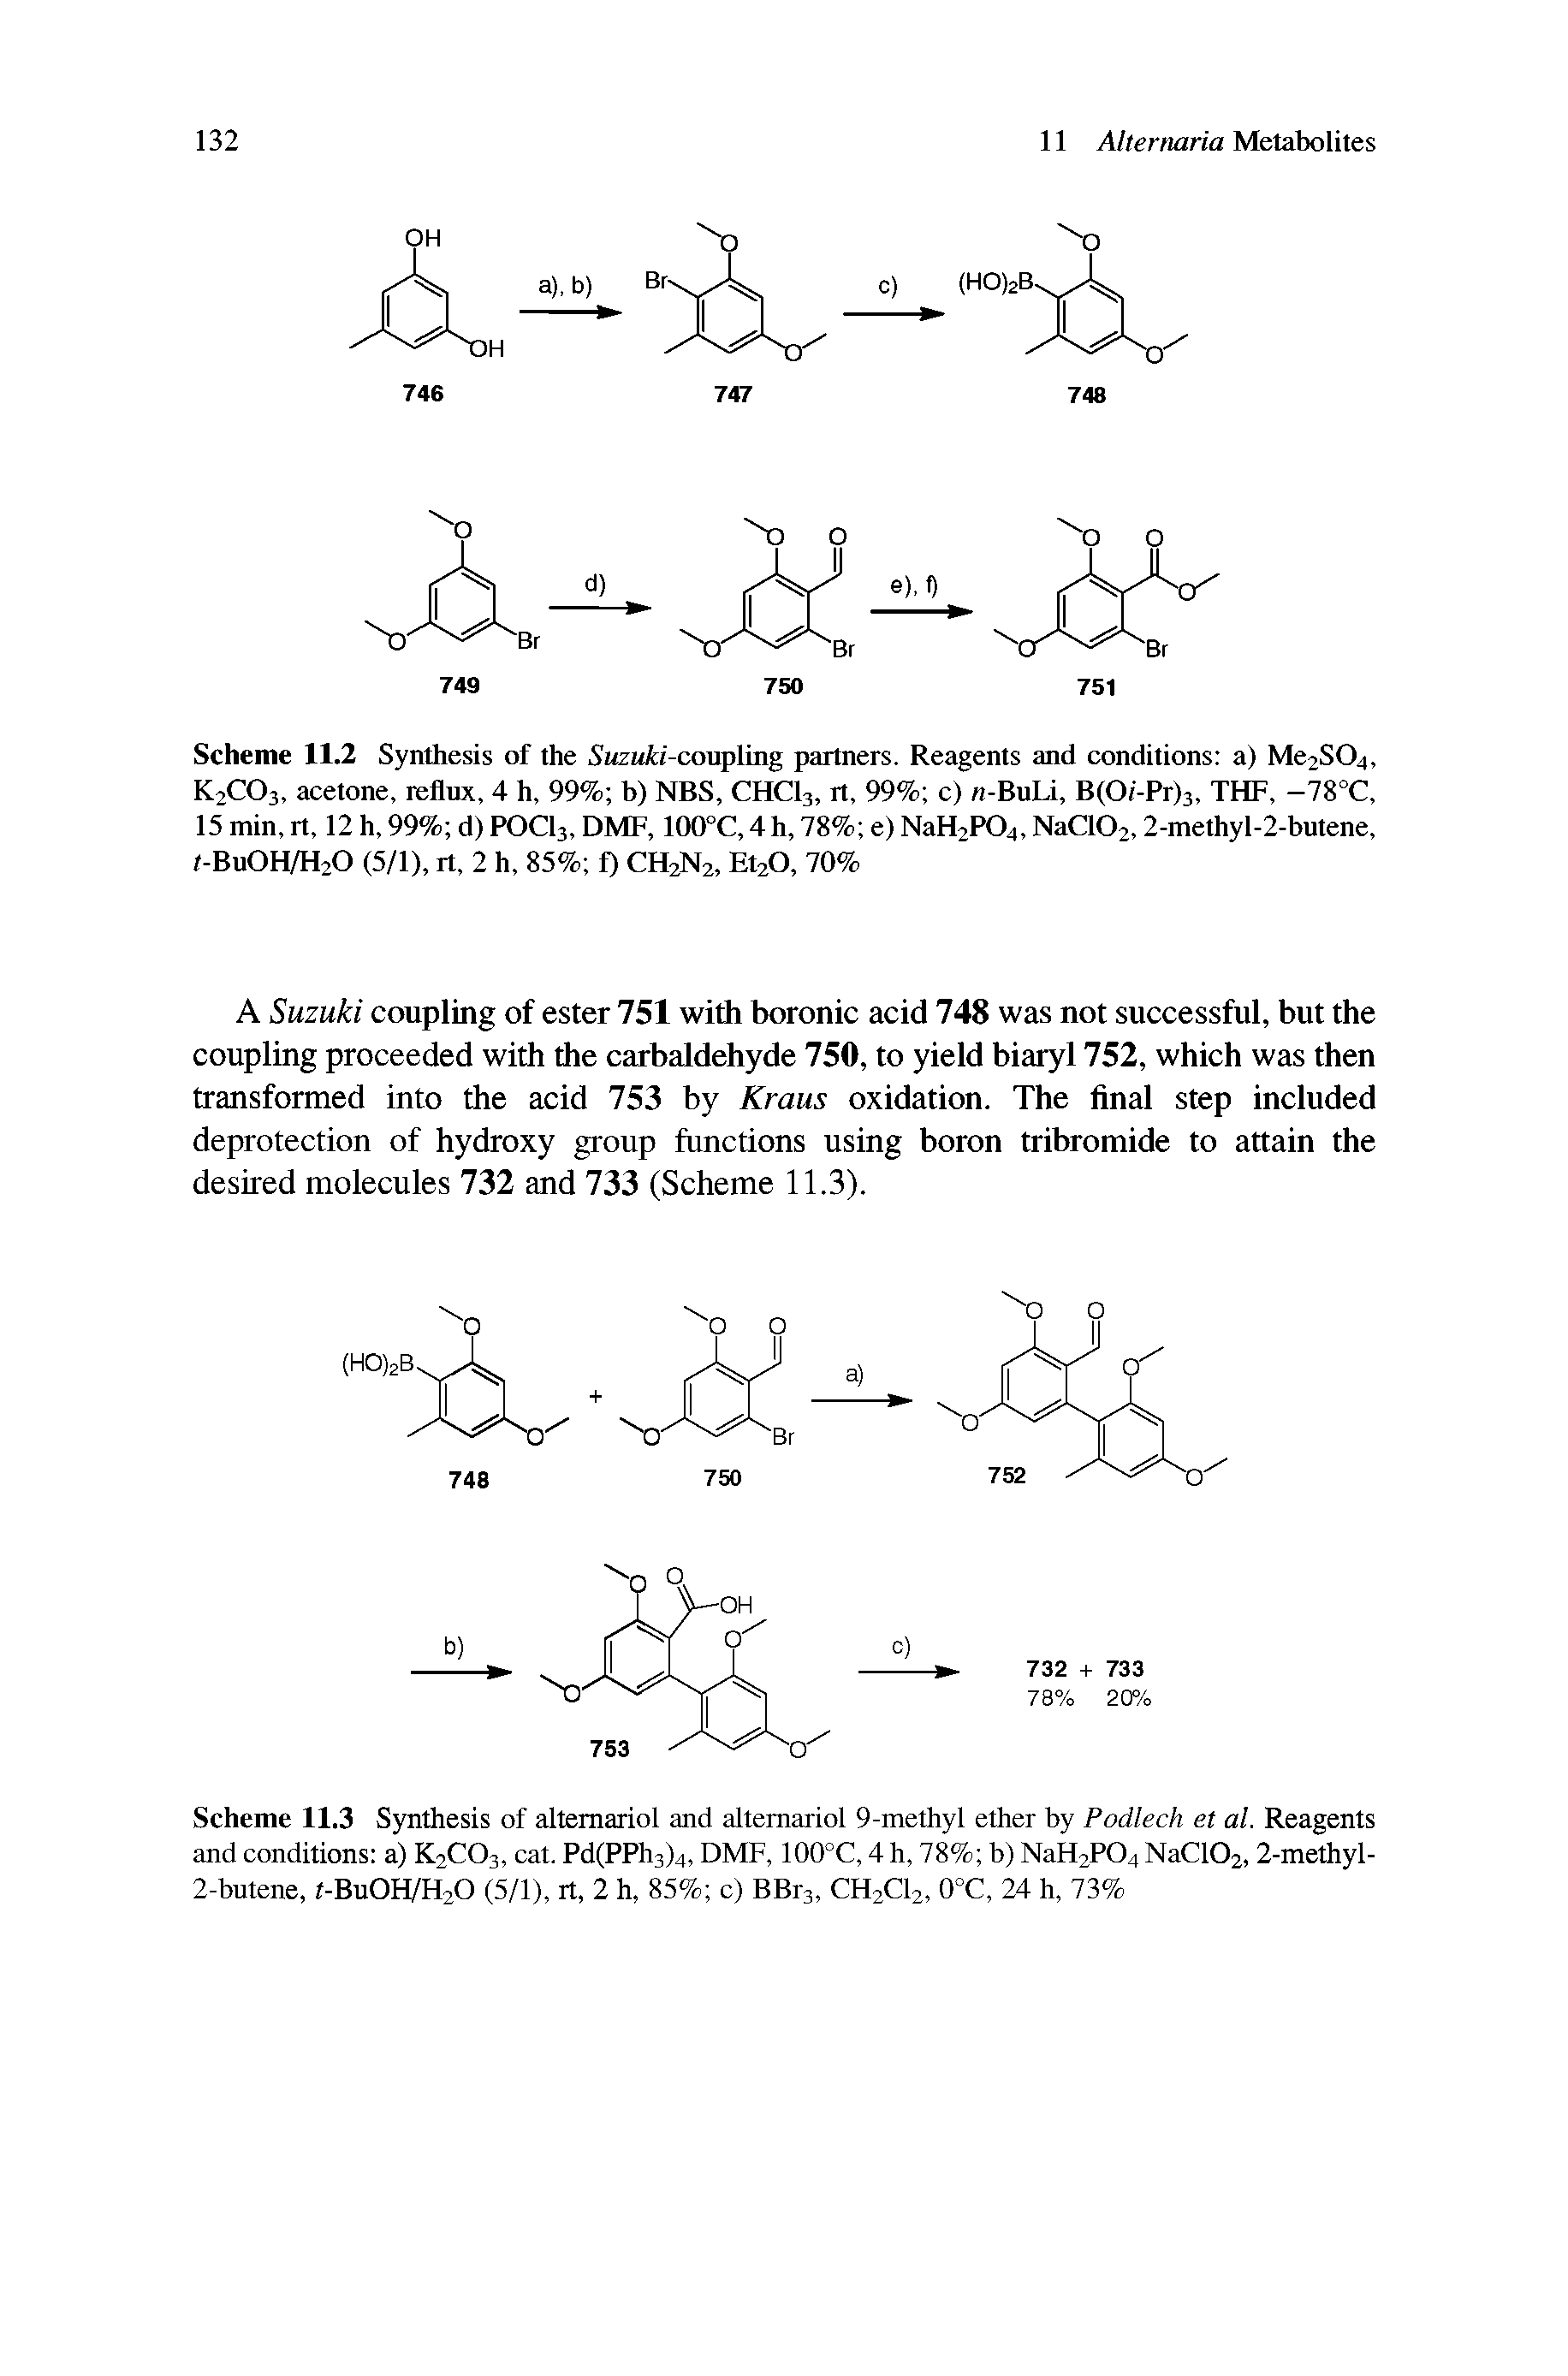 Scheme 11.3 Synthesis of altemariol and altemariol 9-methyl ether by Podlech et al. Reagents and conditions a) K2CO3, cat. Pd(PPh3)4, DMF, 100°C, 4 h, 78% b) NaH2P04 NaC102,2-methyl-...